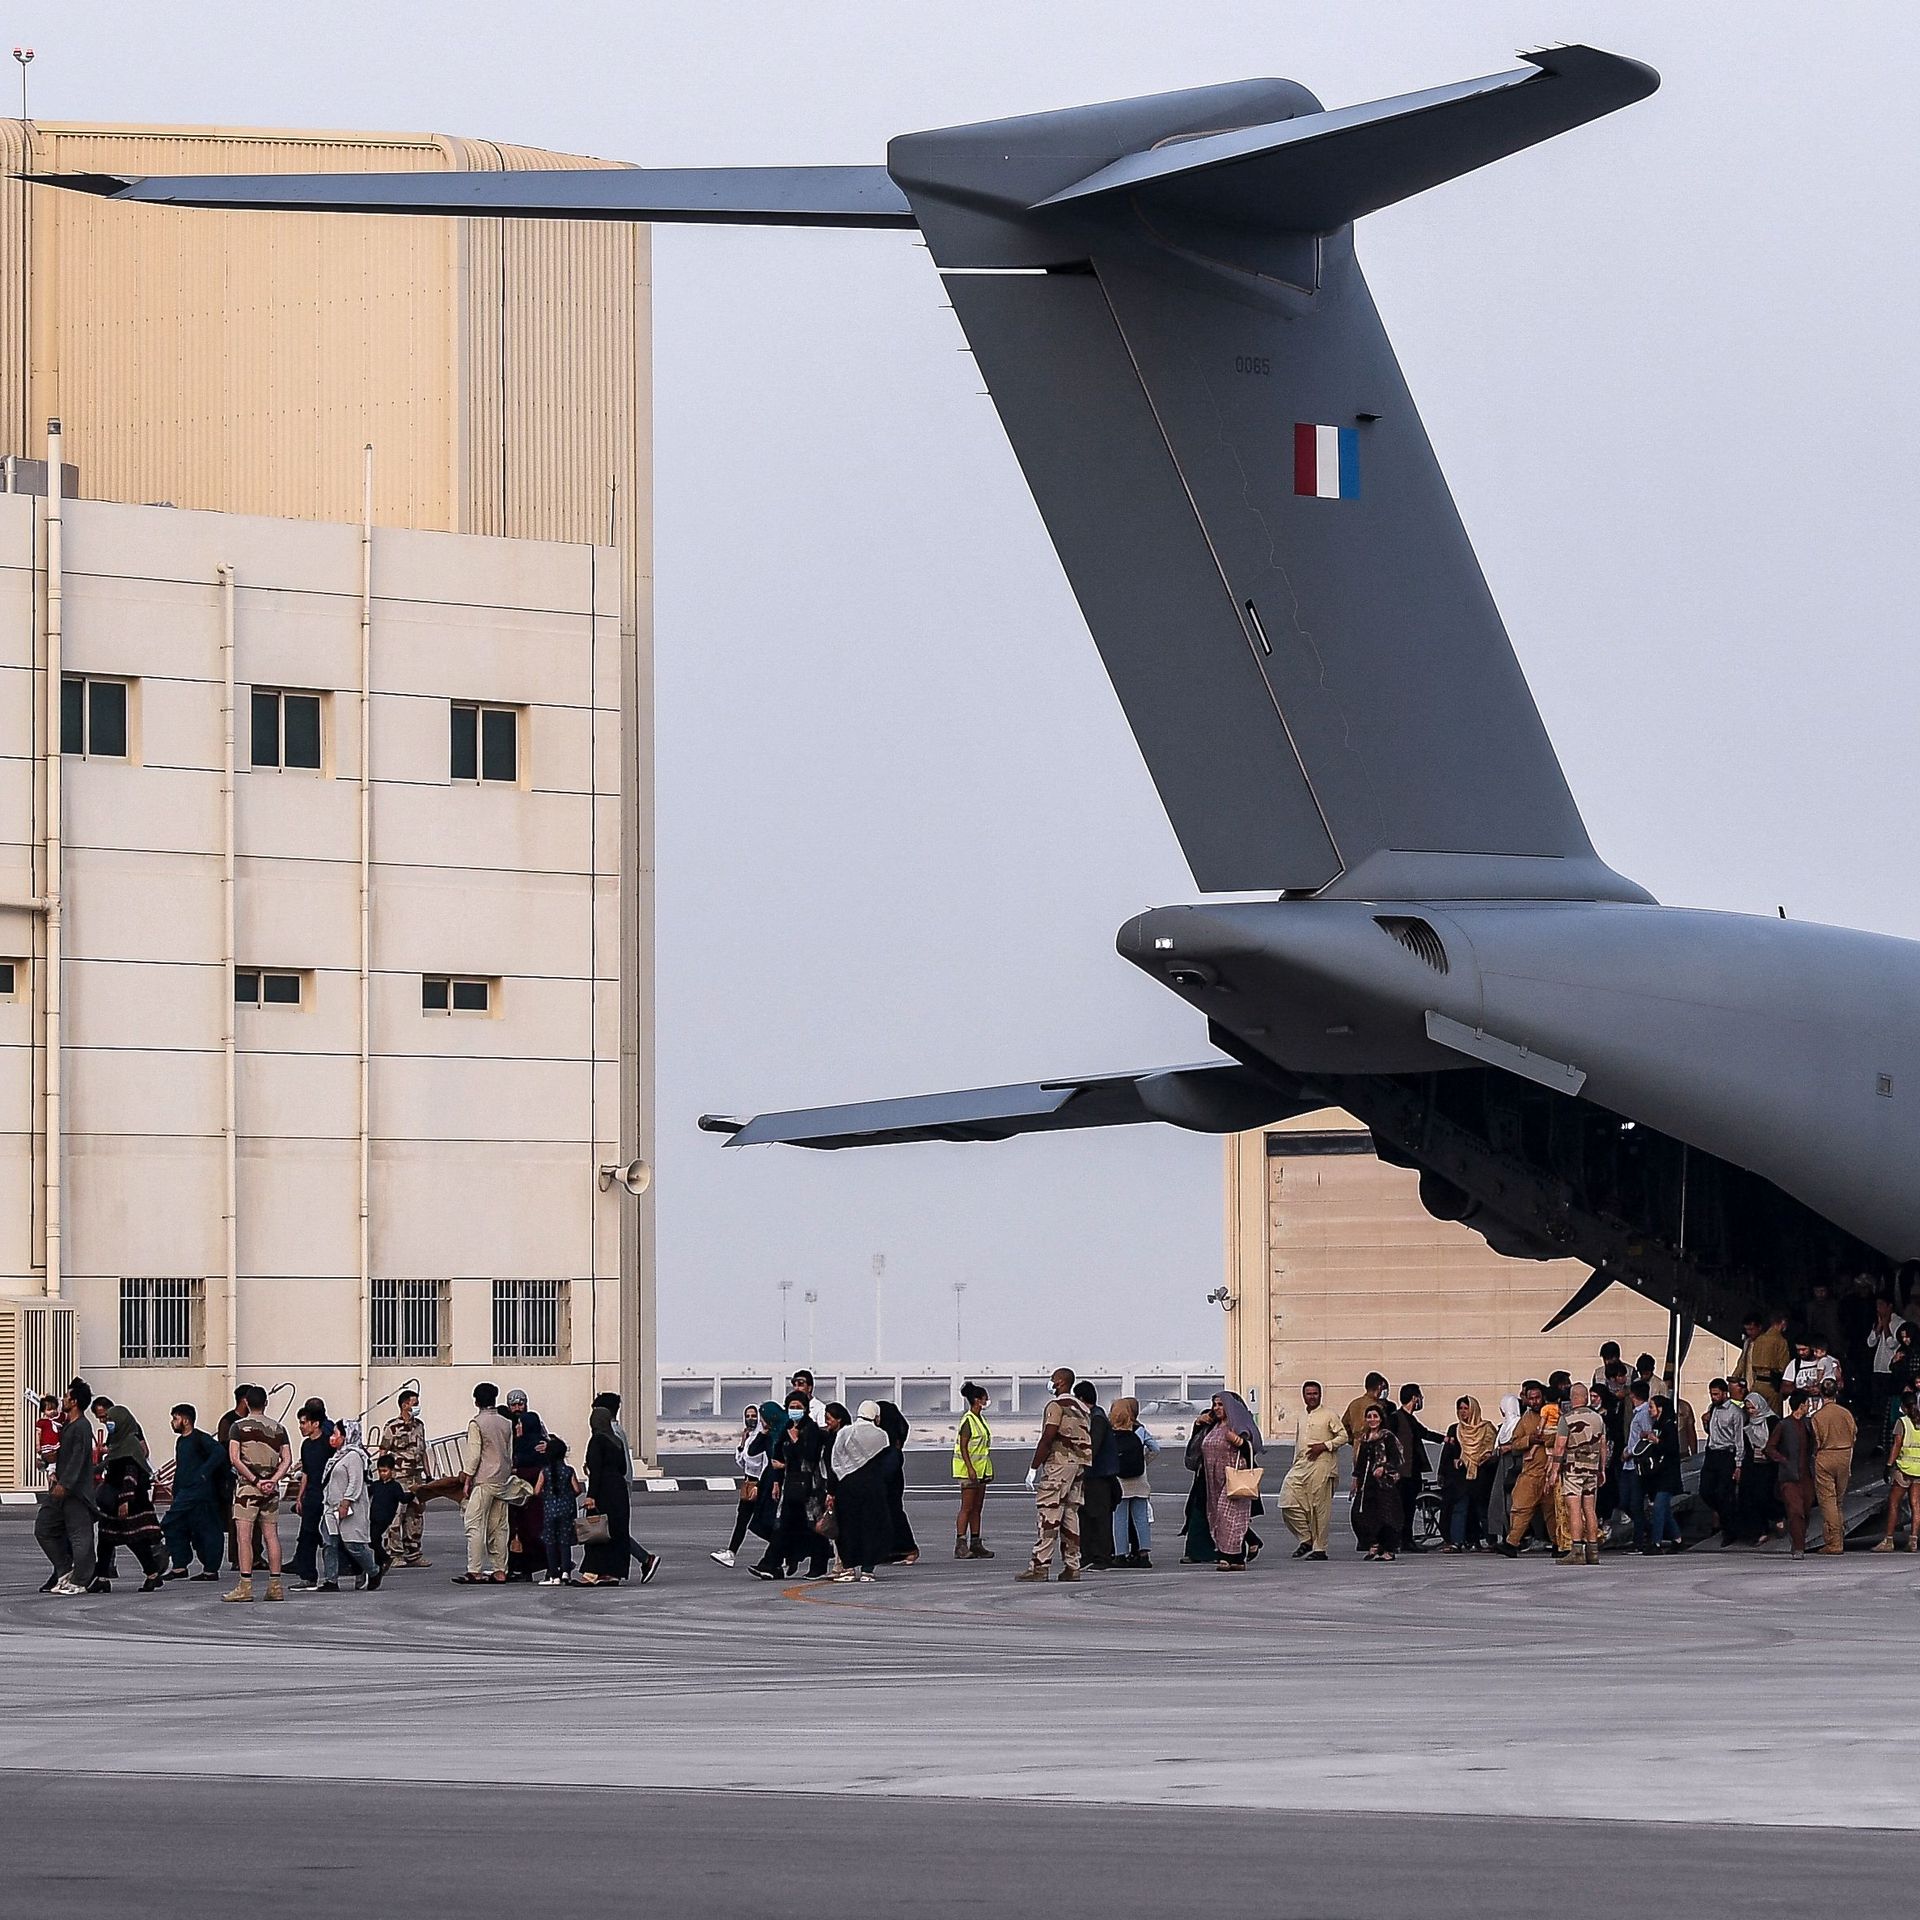 People disembark from a Airbus A400M military transport aircraft at the French military air base 104 of Al Dhafra, near Abu Dhabi, on August 23, after being evacuated from Kabul